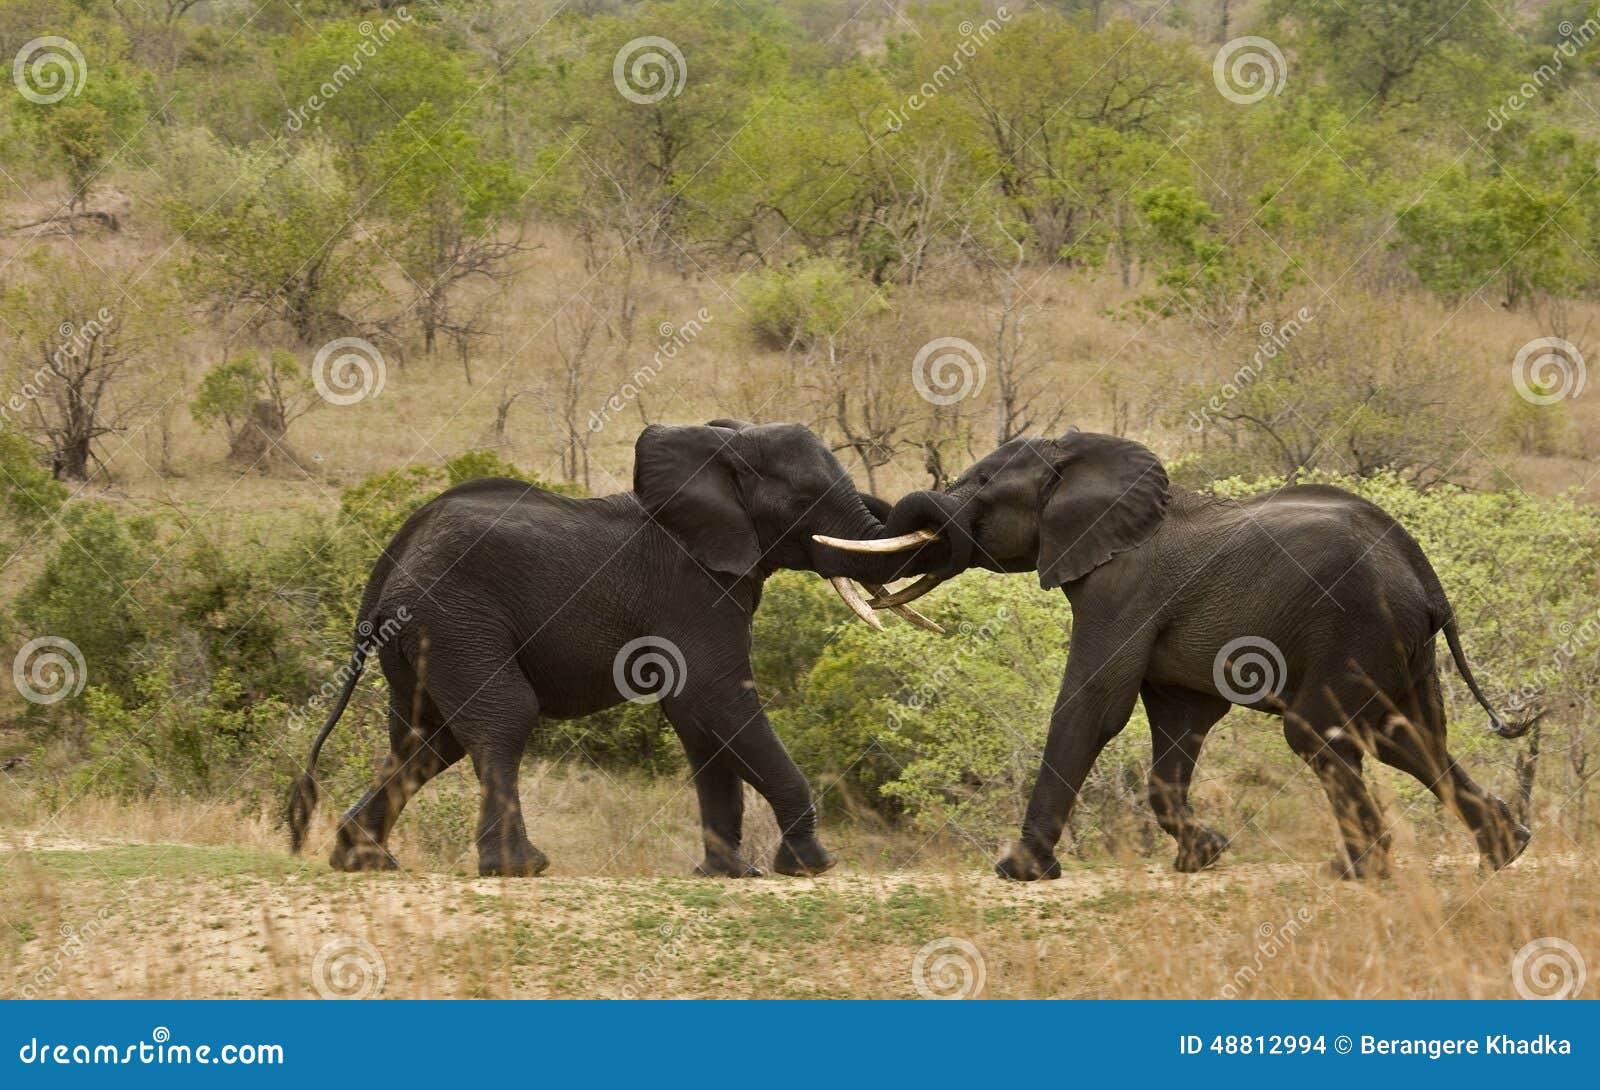 wild elephant fighting and playing, african savannah, kruger, south africa